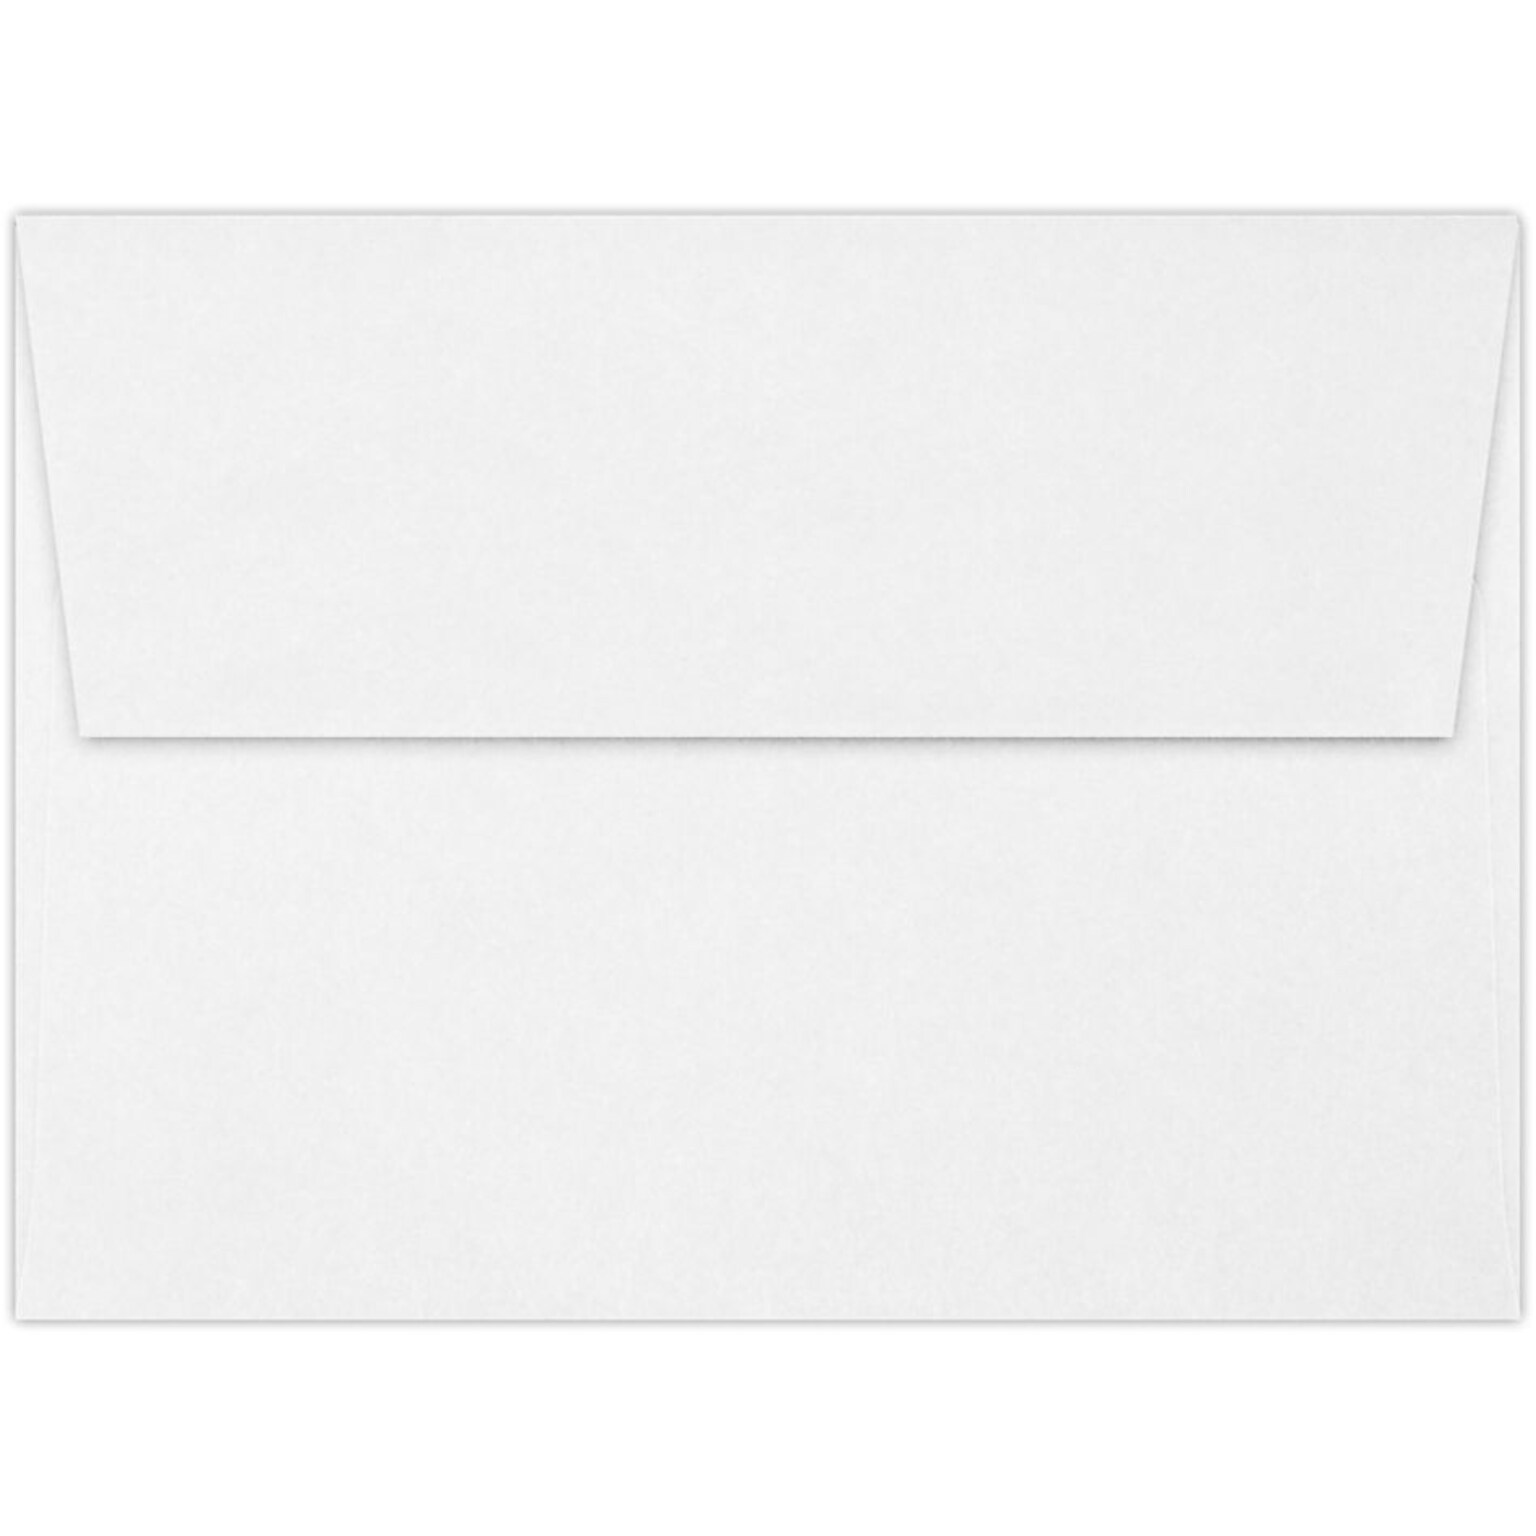 LUX A6 Invitation Envelopes (4 3/4 x 6 1/2) 500/Pack, 70lb. Classic Crest® Bright White - 100% Recycled (4875-70RBW-500)